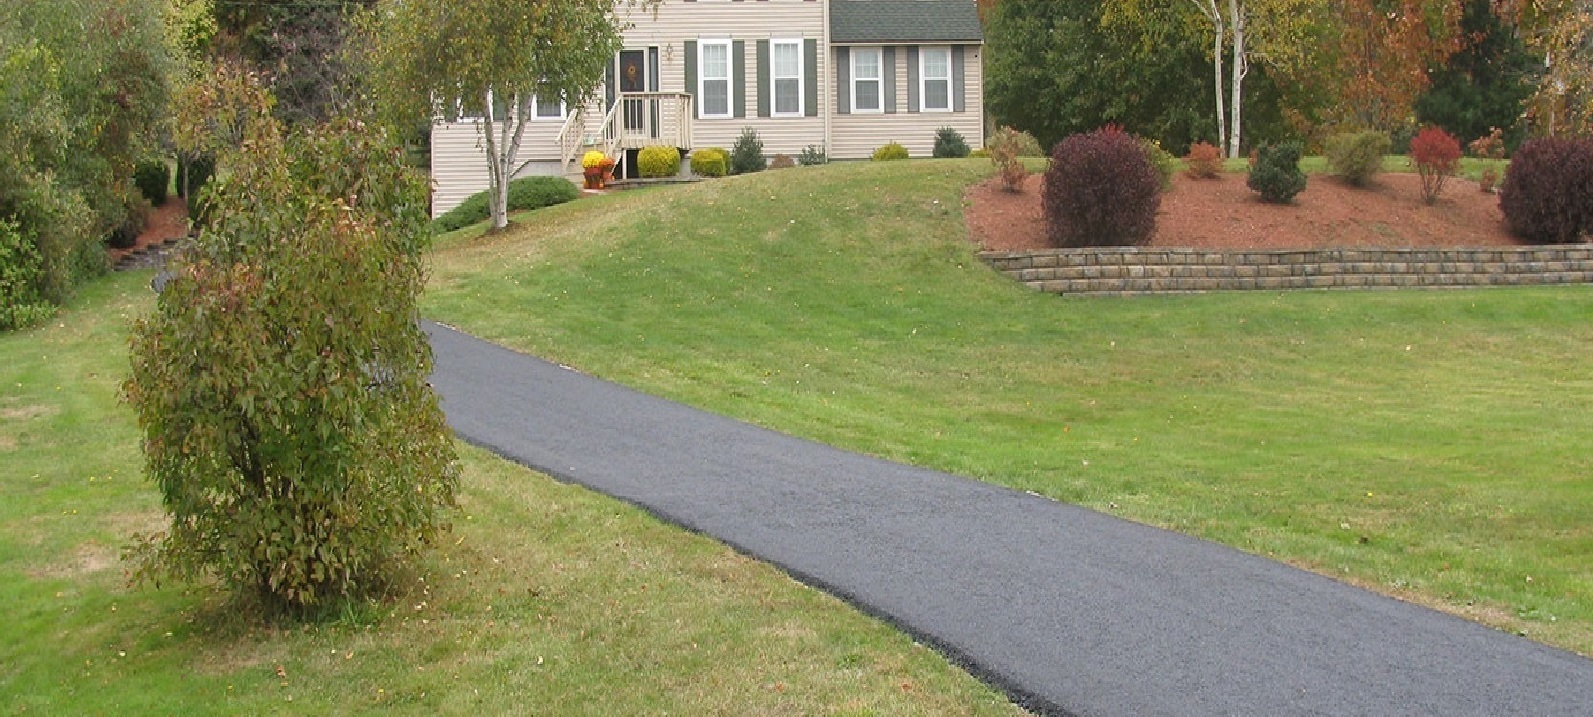 driveway paving companies in nh & mass